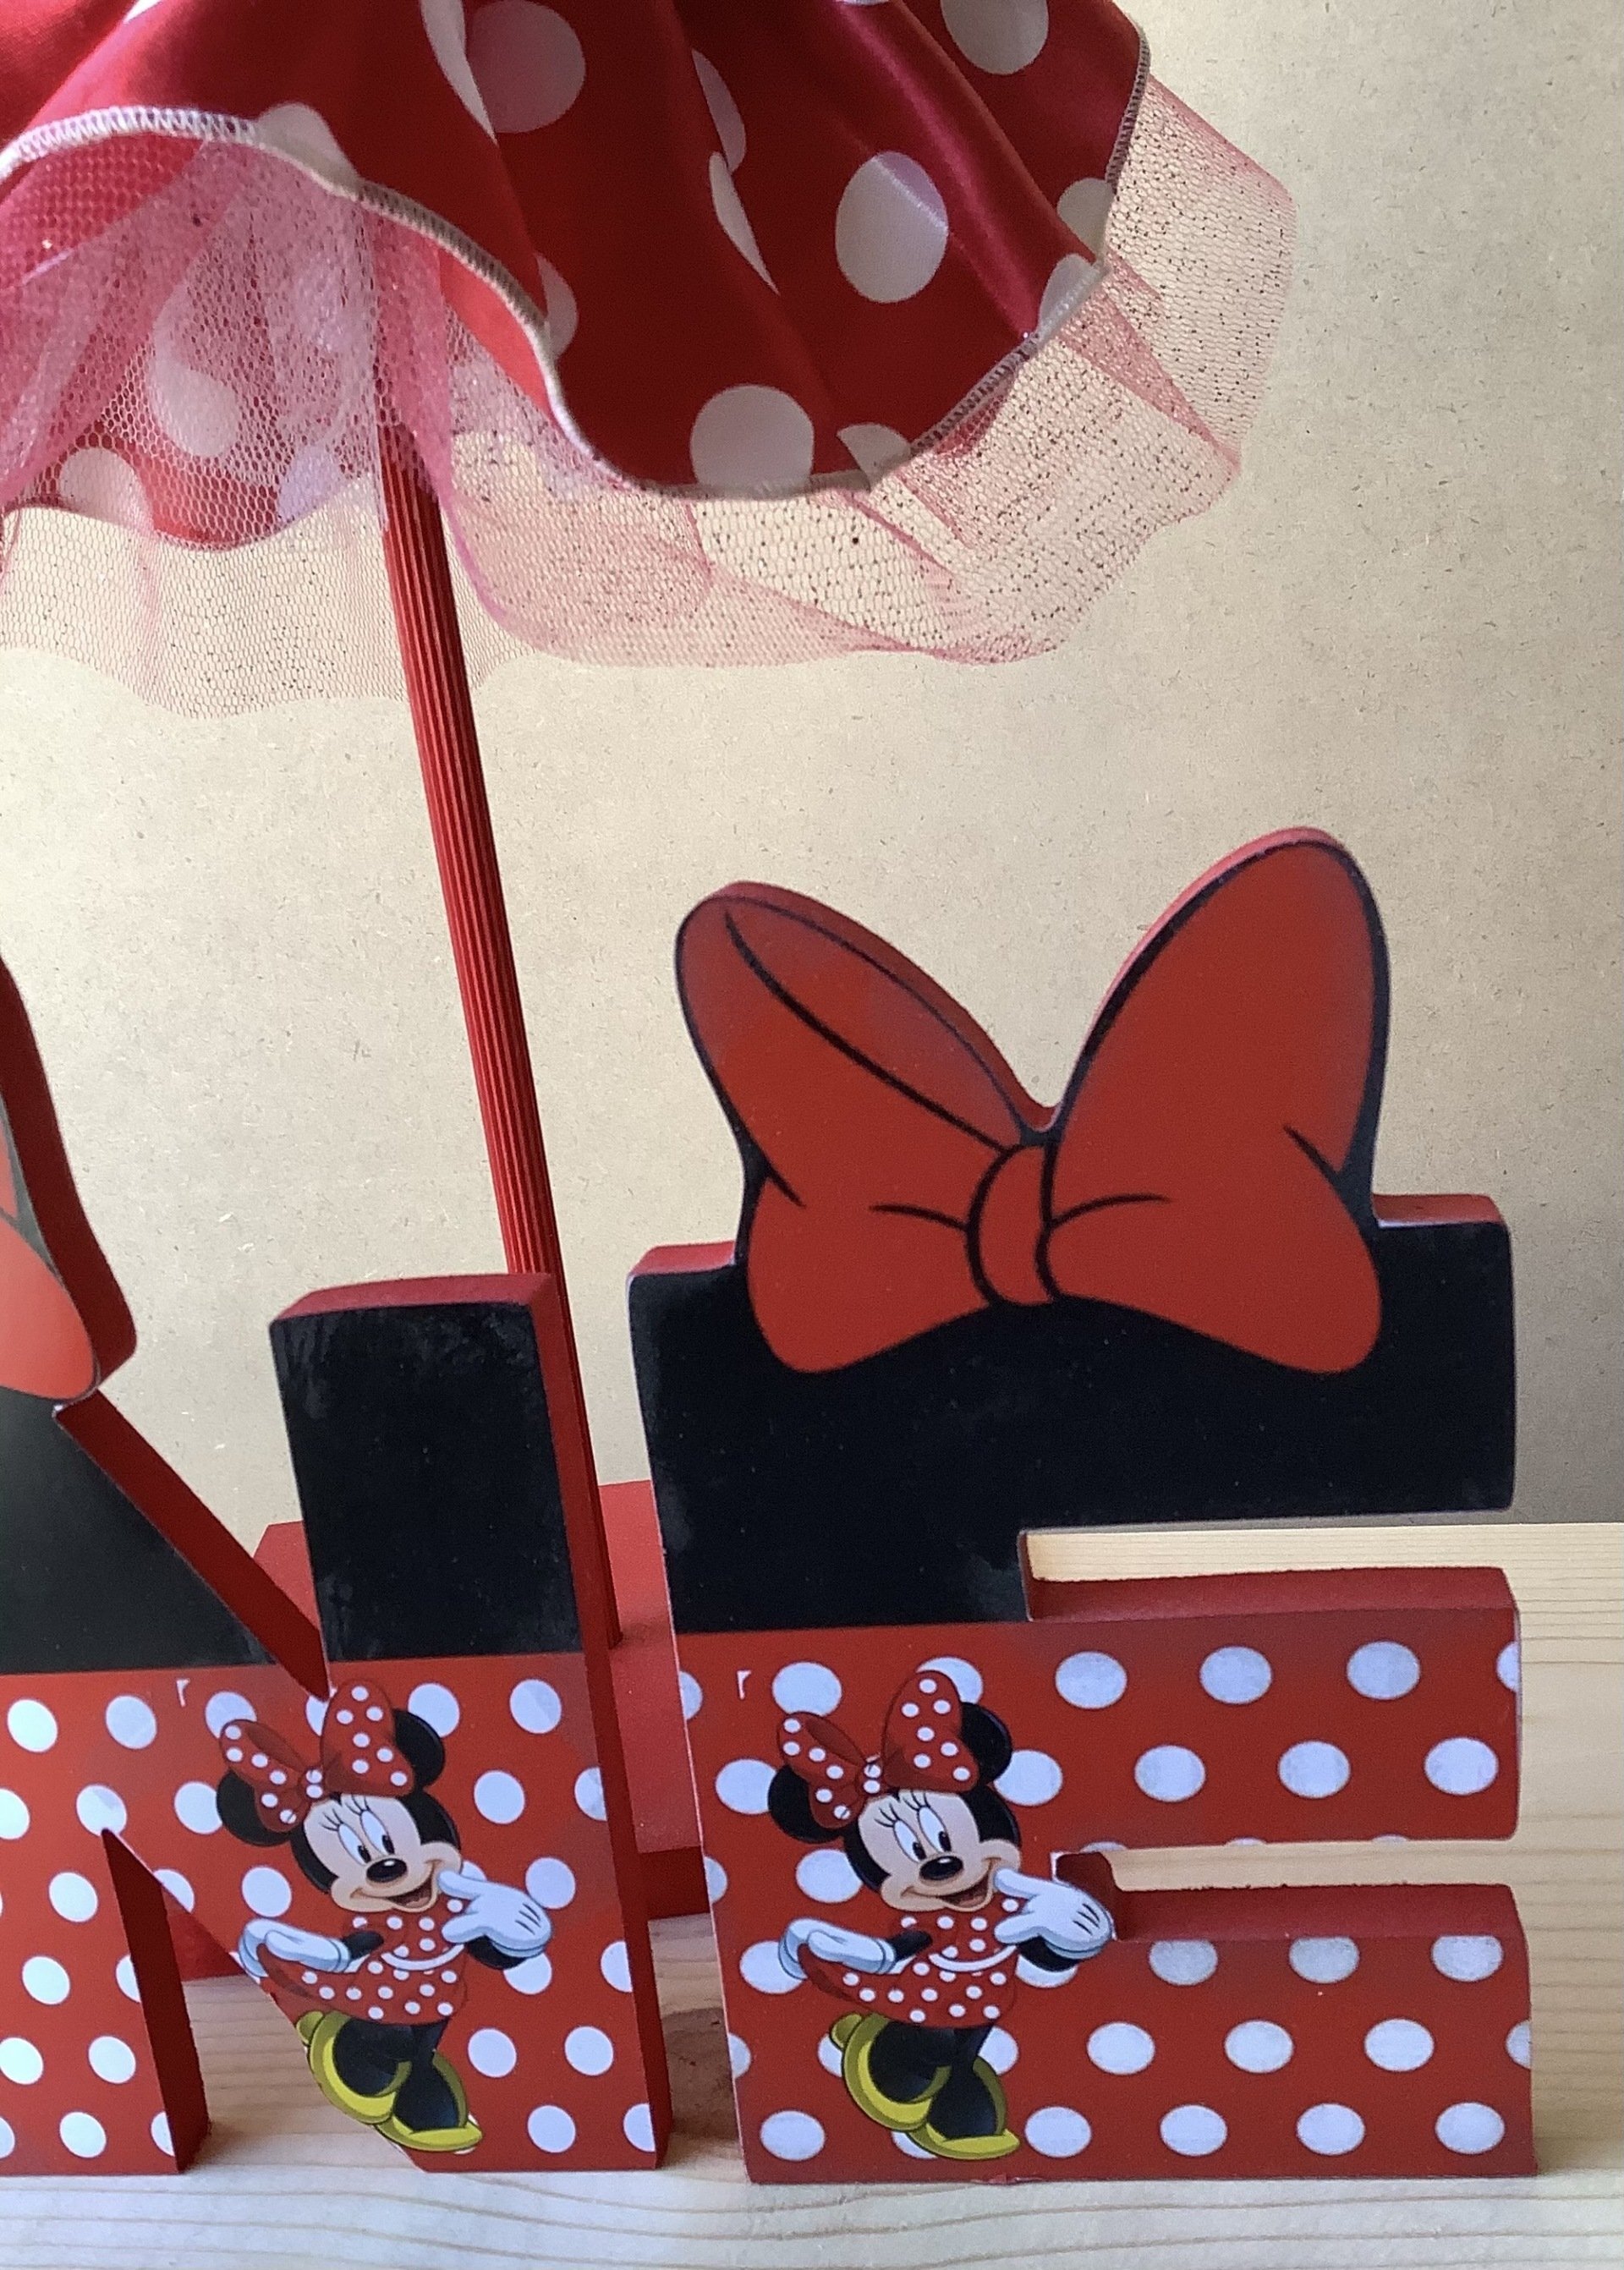 DIY Louis Style #17 Minnie Mouse with Red Dress Inspired 5x7 Sign Poster  *DIGITAL FILE ONLY* for Bridal Showers, Sweet Sixteen, Wedding Shower